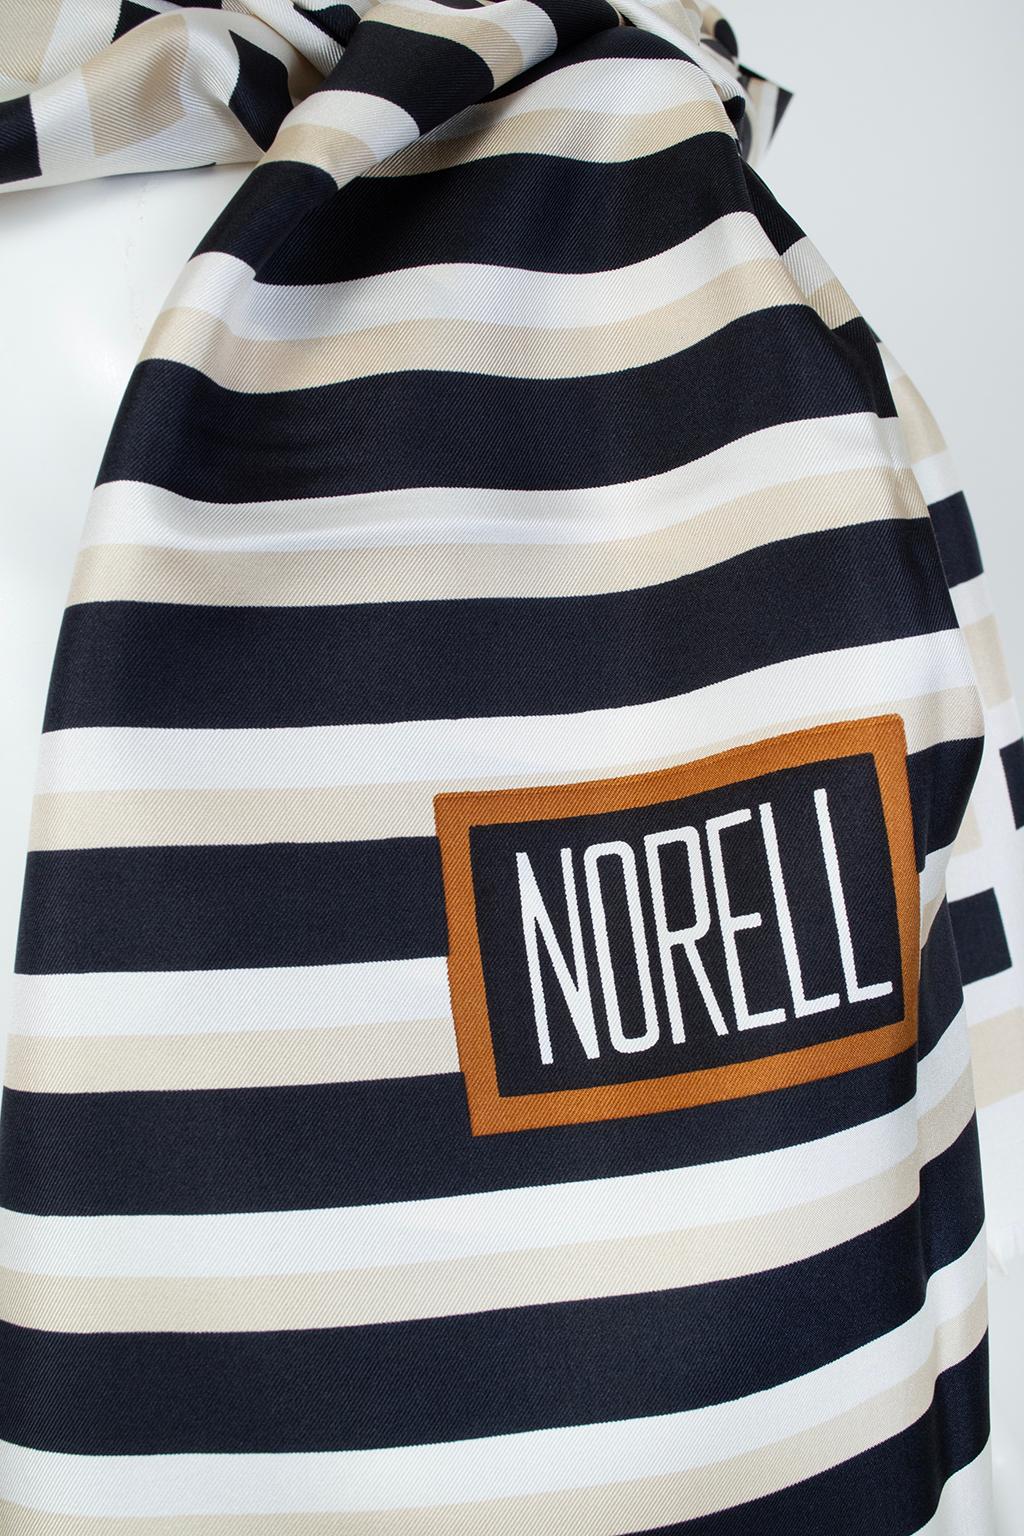 Norell Oversize Graphic Black Ivory Taupe Stripe Silk Scarf – 72” x 36”, 1960s For Sale 3